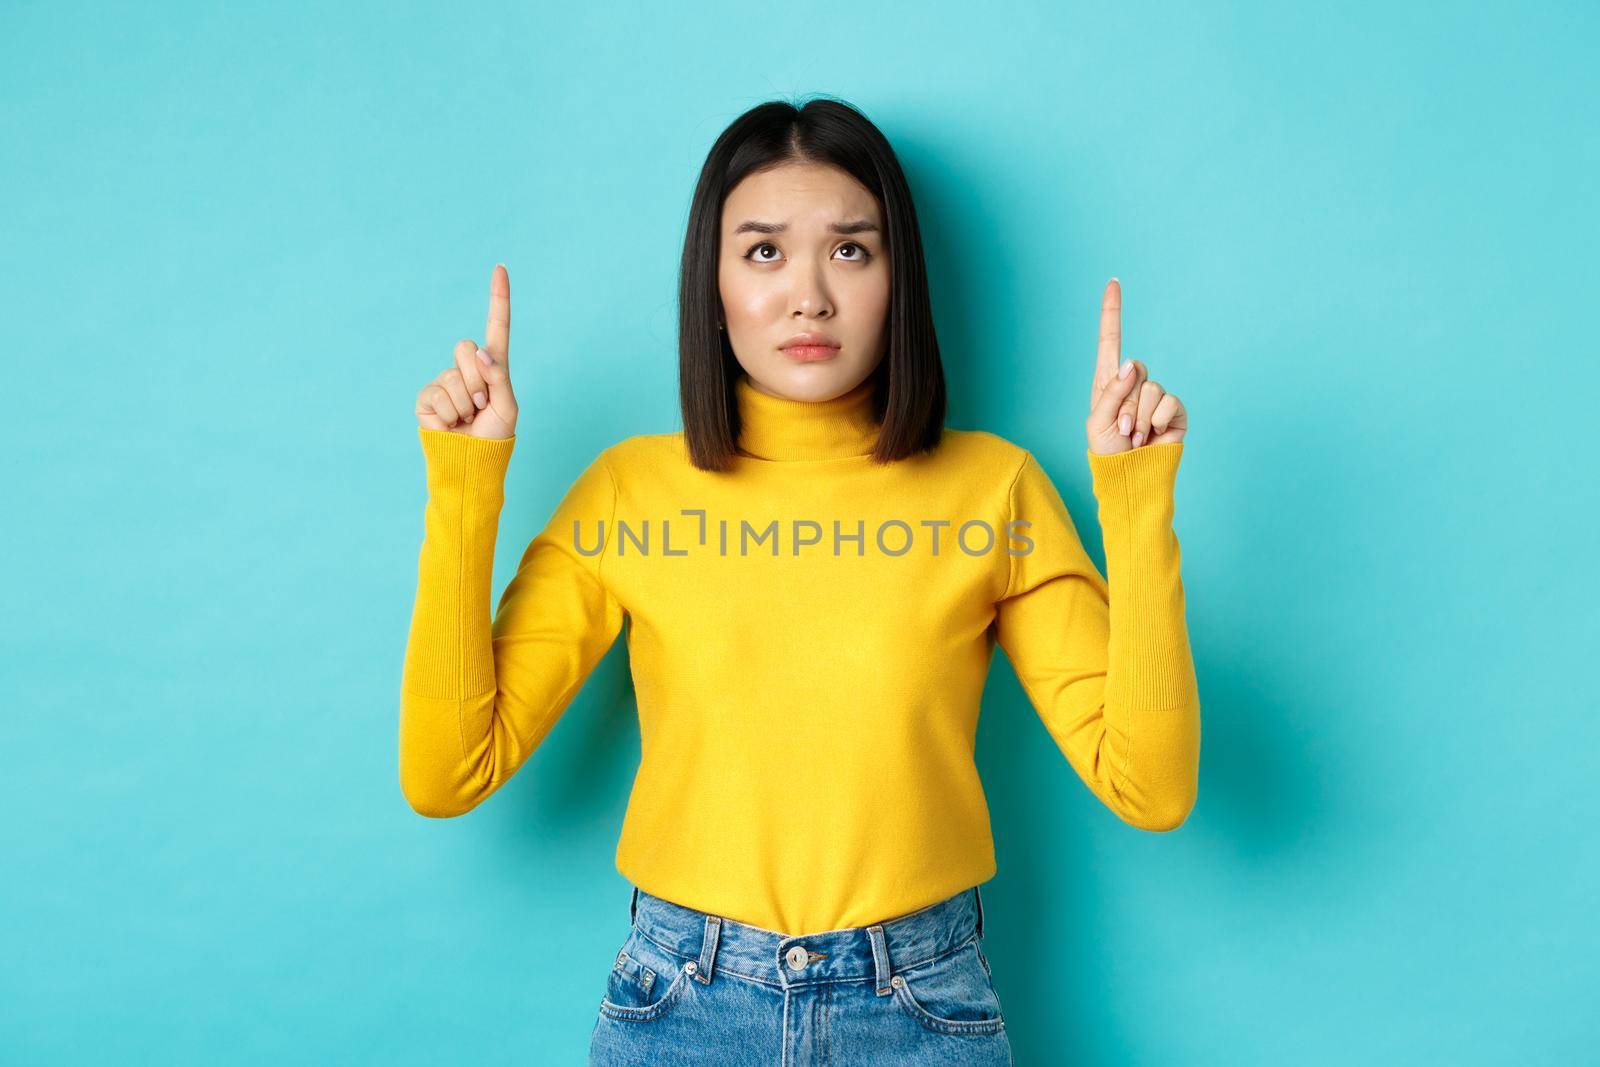 Sad and gloomy korean woman pointing fingers up, looking with jealous and upset face, standing over blue background.